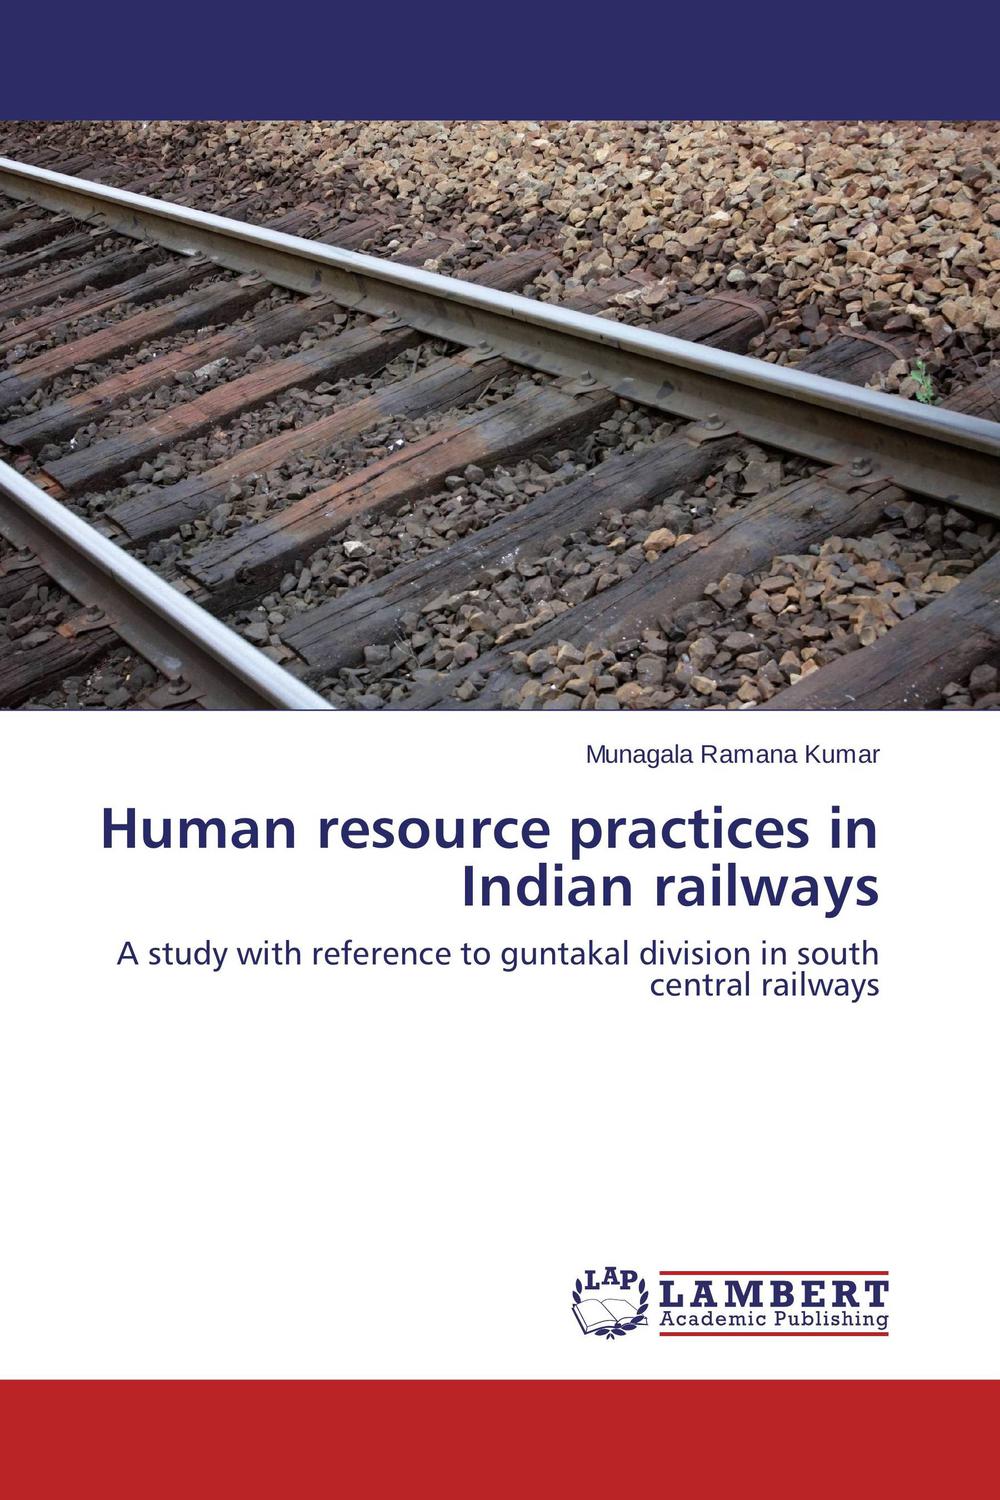 human resource practices in indian railways a study with reference to guntakal division in south central